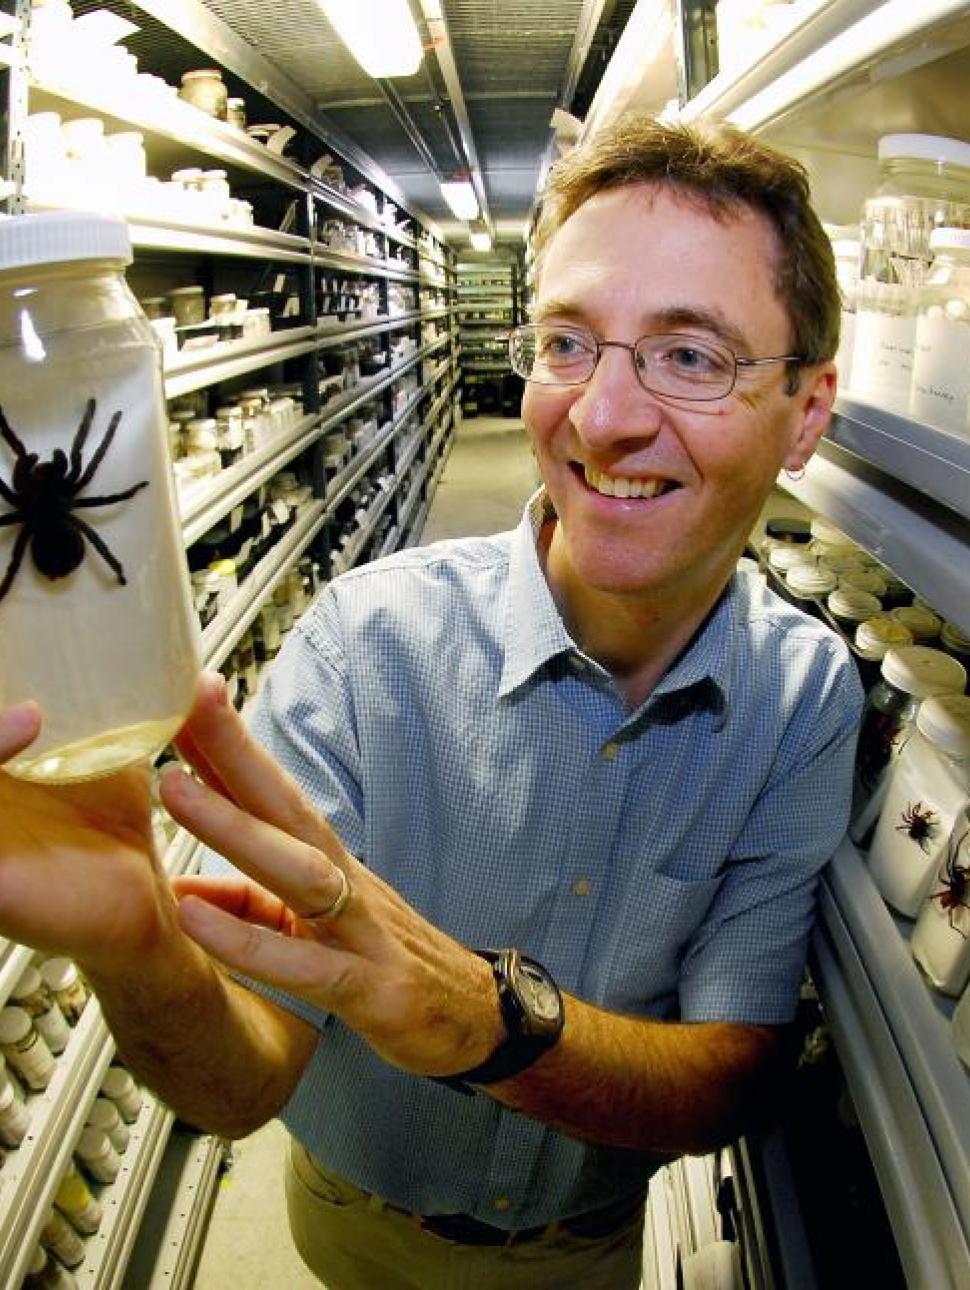 Dr Mark Harvey wears a blue button up shirt, tan trousers and thin framed glasses, and smiles as he holds up a specimen jar containing a large black spider. He stands in a collections facility surrounded by jars of spider specimens